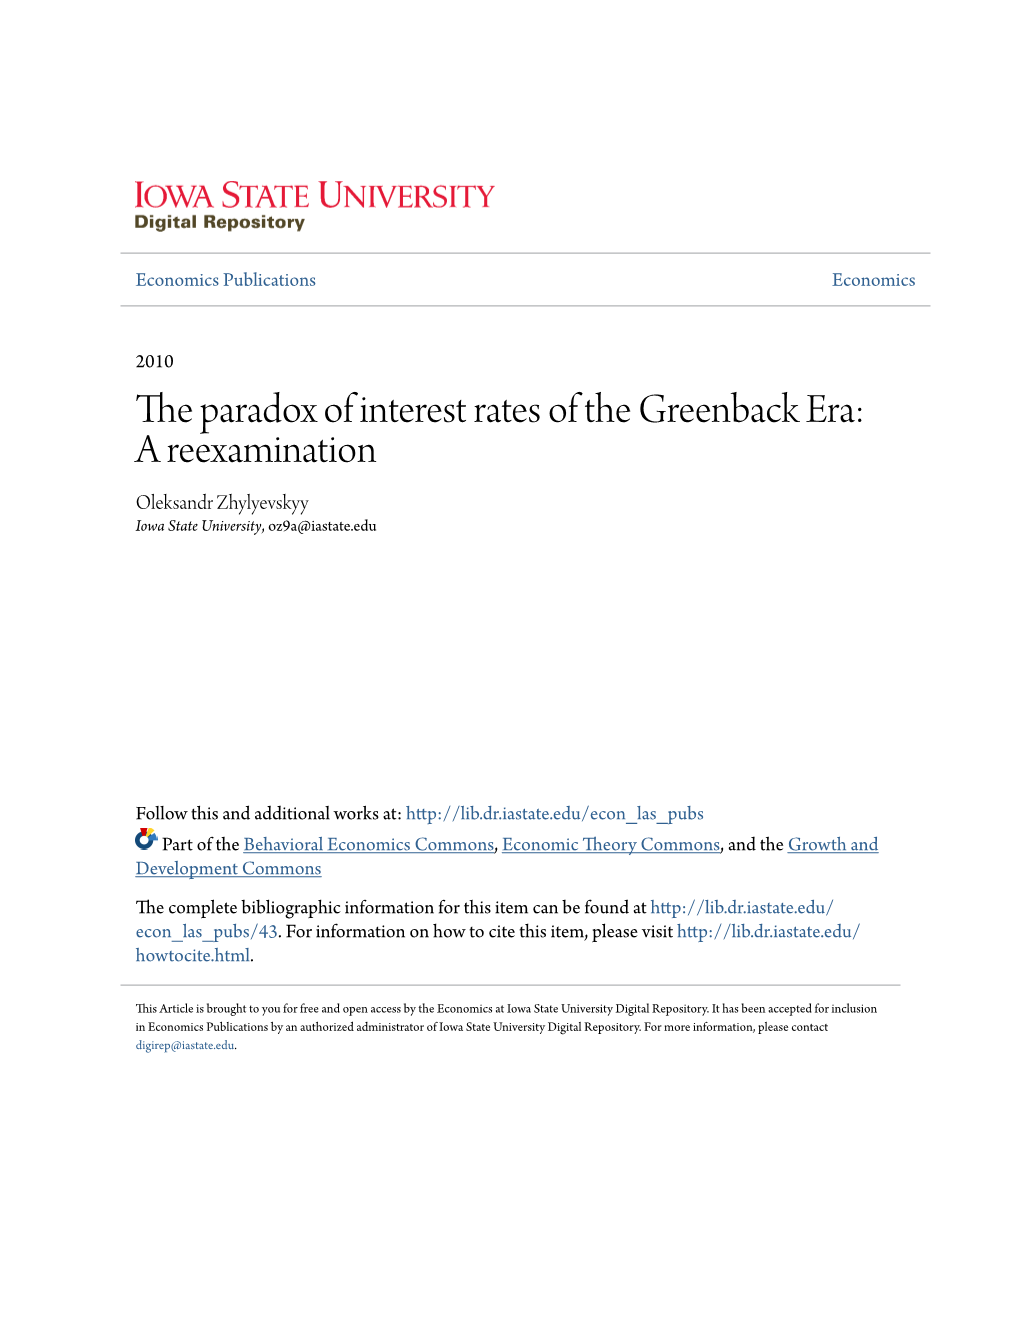 The Paradox of Interest Rates of the Greenback Era: a Reexamination